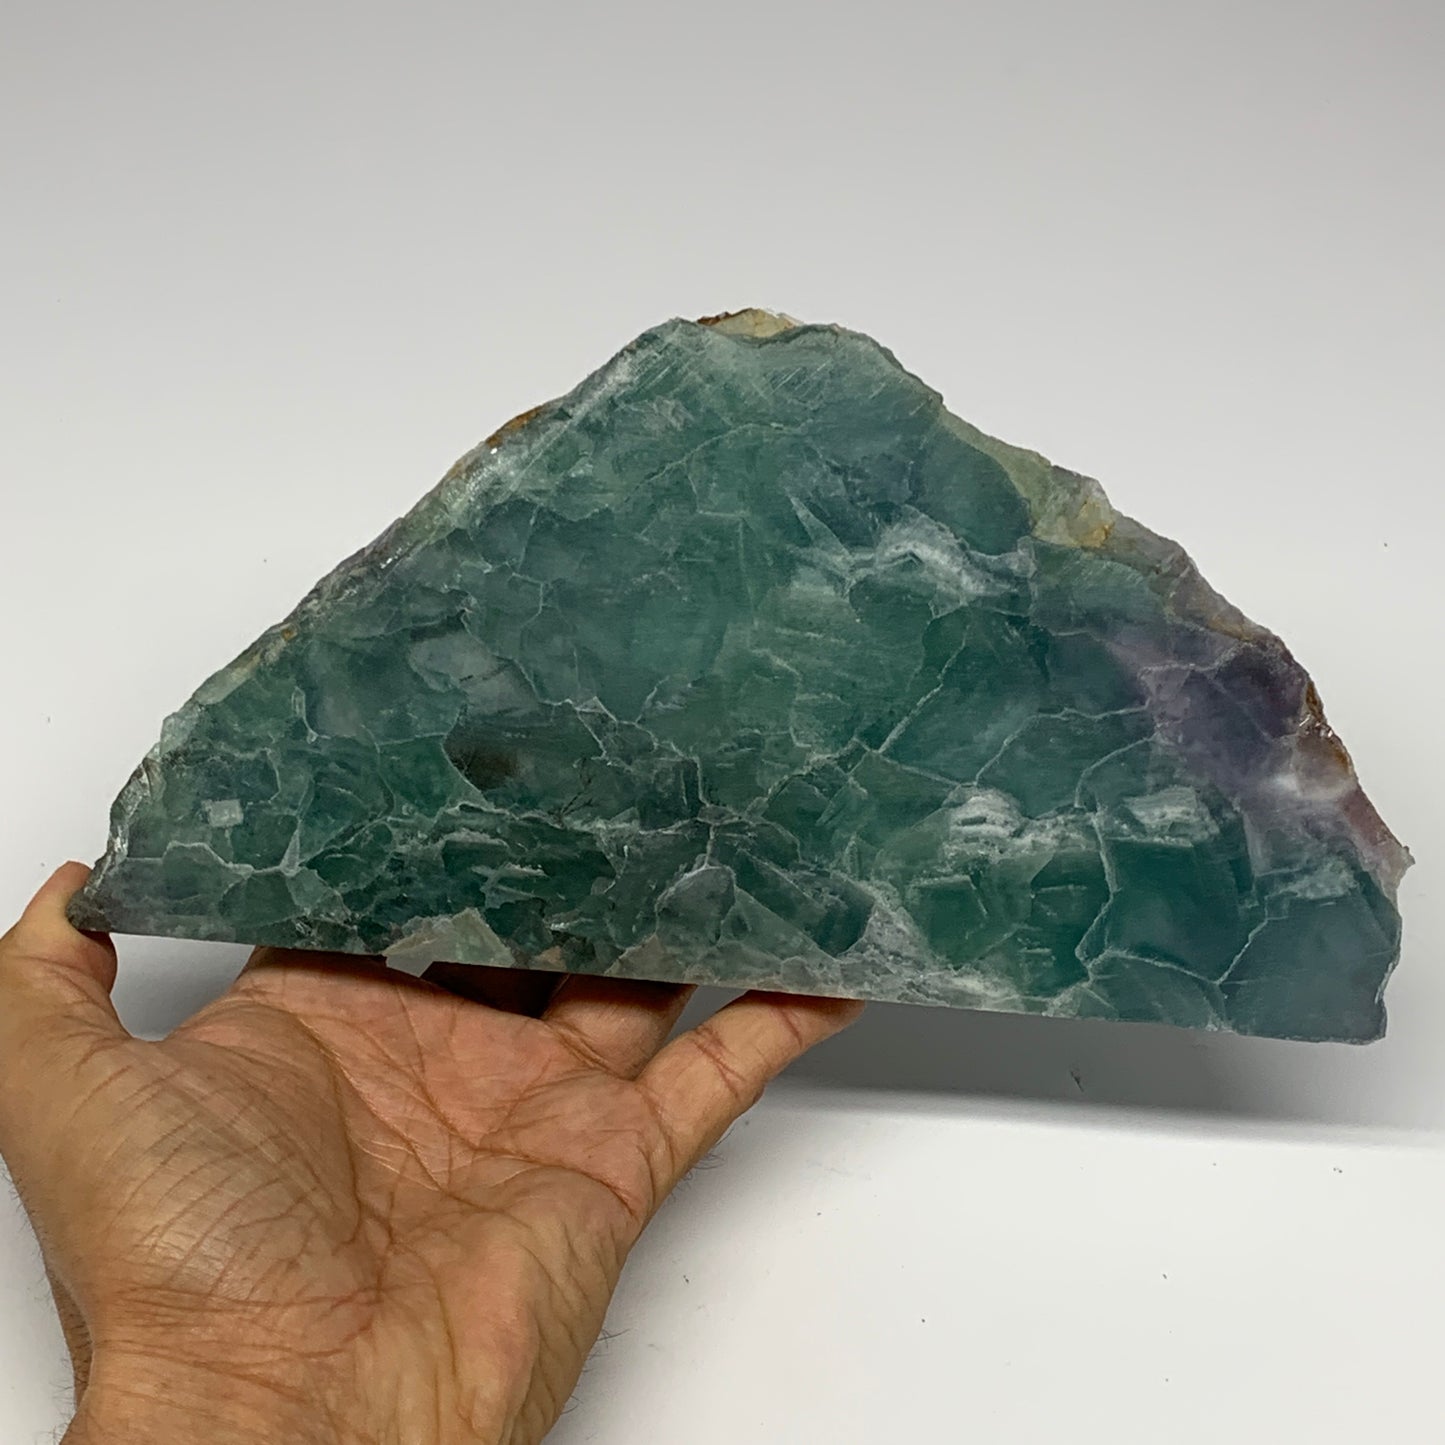 955g, 9.25"x4.4"x0.8", Natural Untreated Fluorite Slab Crystal @Mexico, B18627